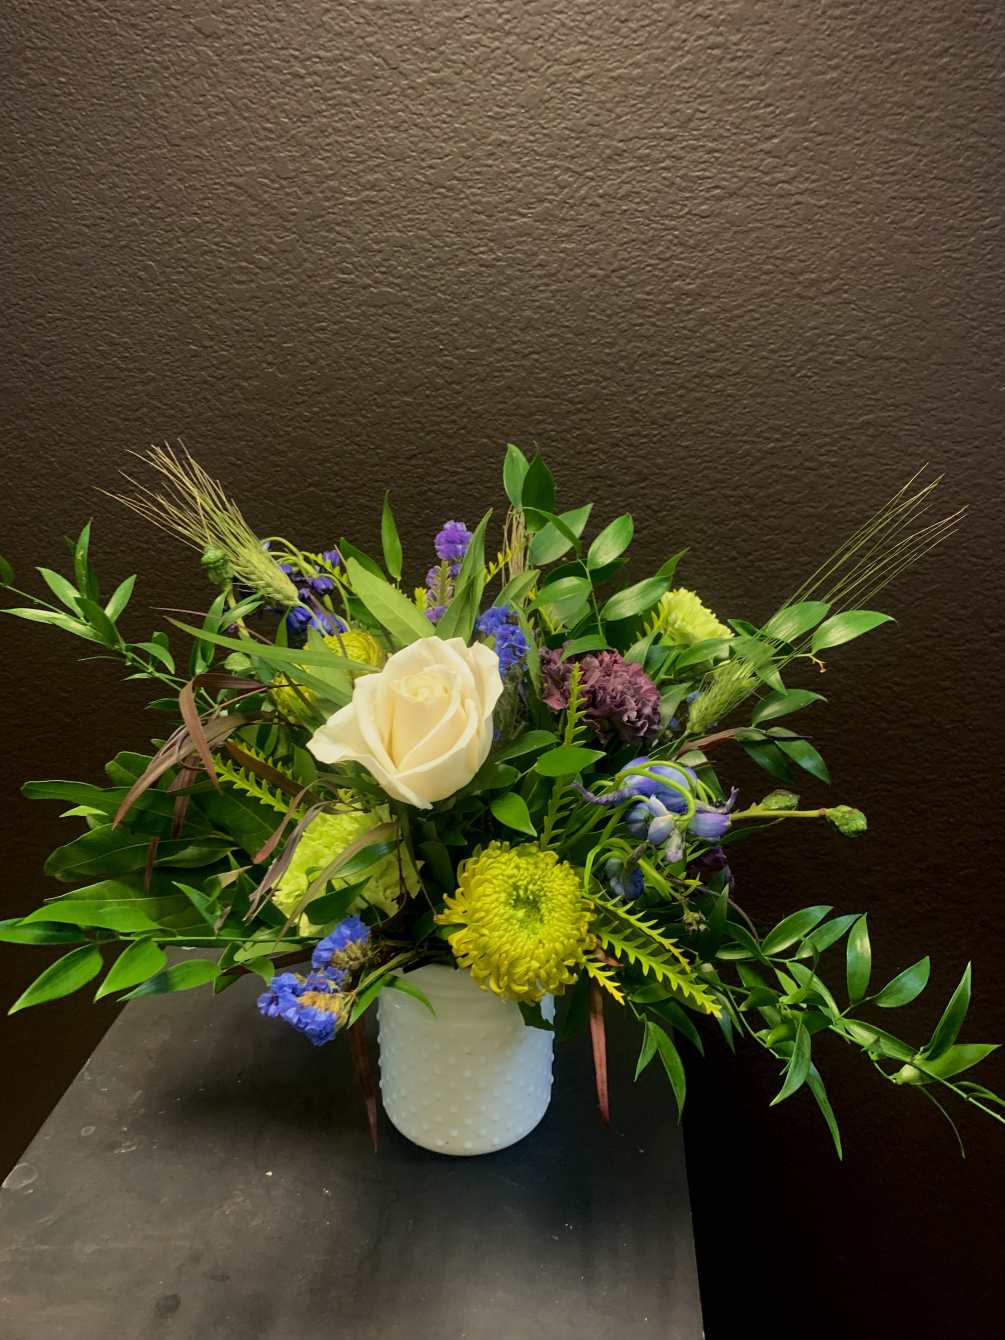 This floral arrangement is crafted to bring joy and warmth with its